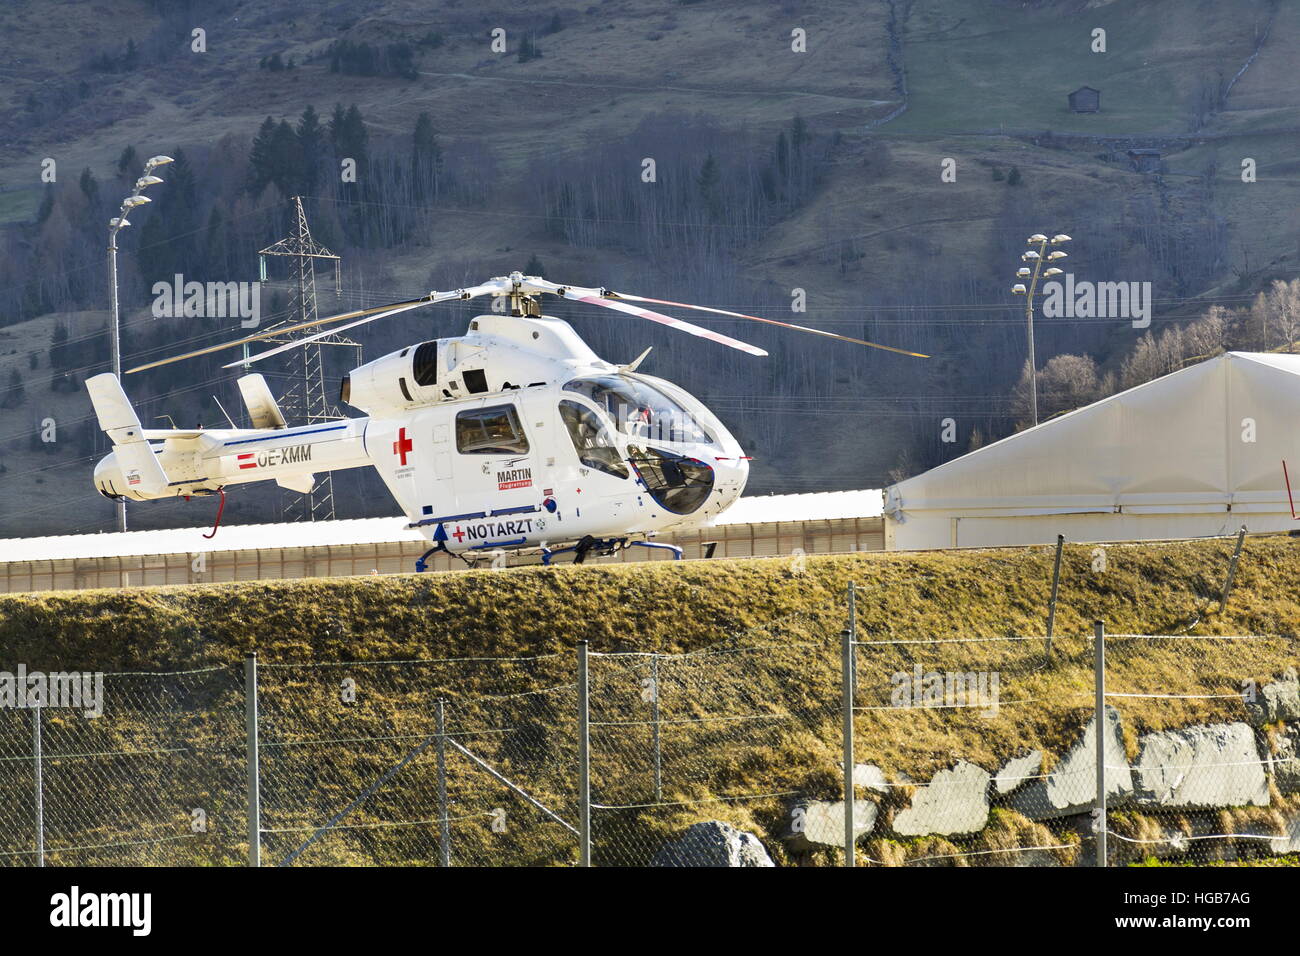 Red Cross medic MD Helicopter MD Explorer by McDonnell Douglas Helicopter Systems stands on heliport in Matrei, Austria Stock Photo